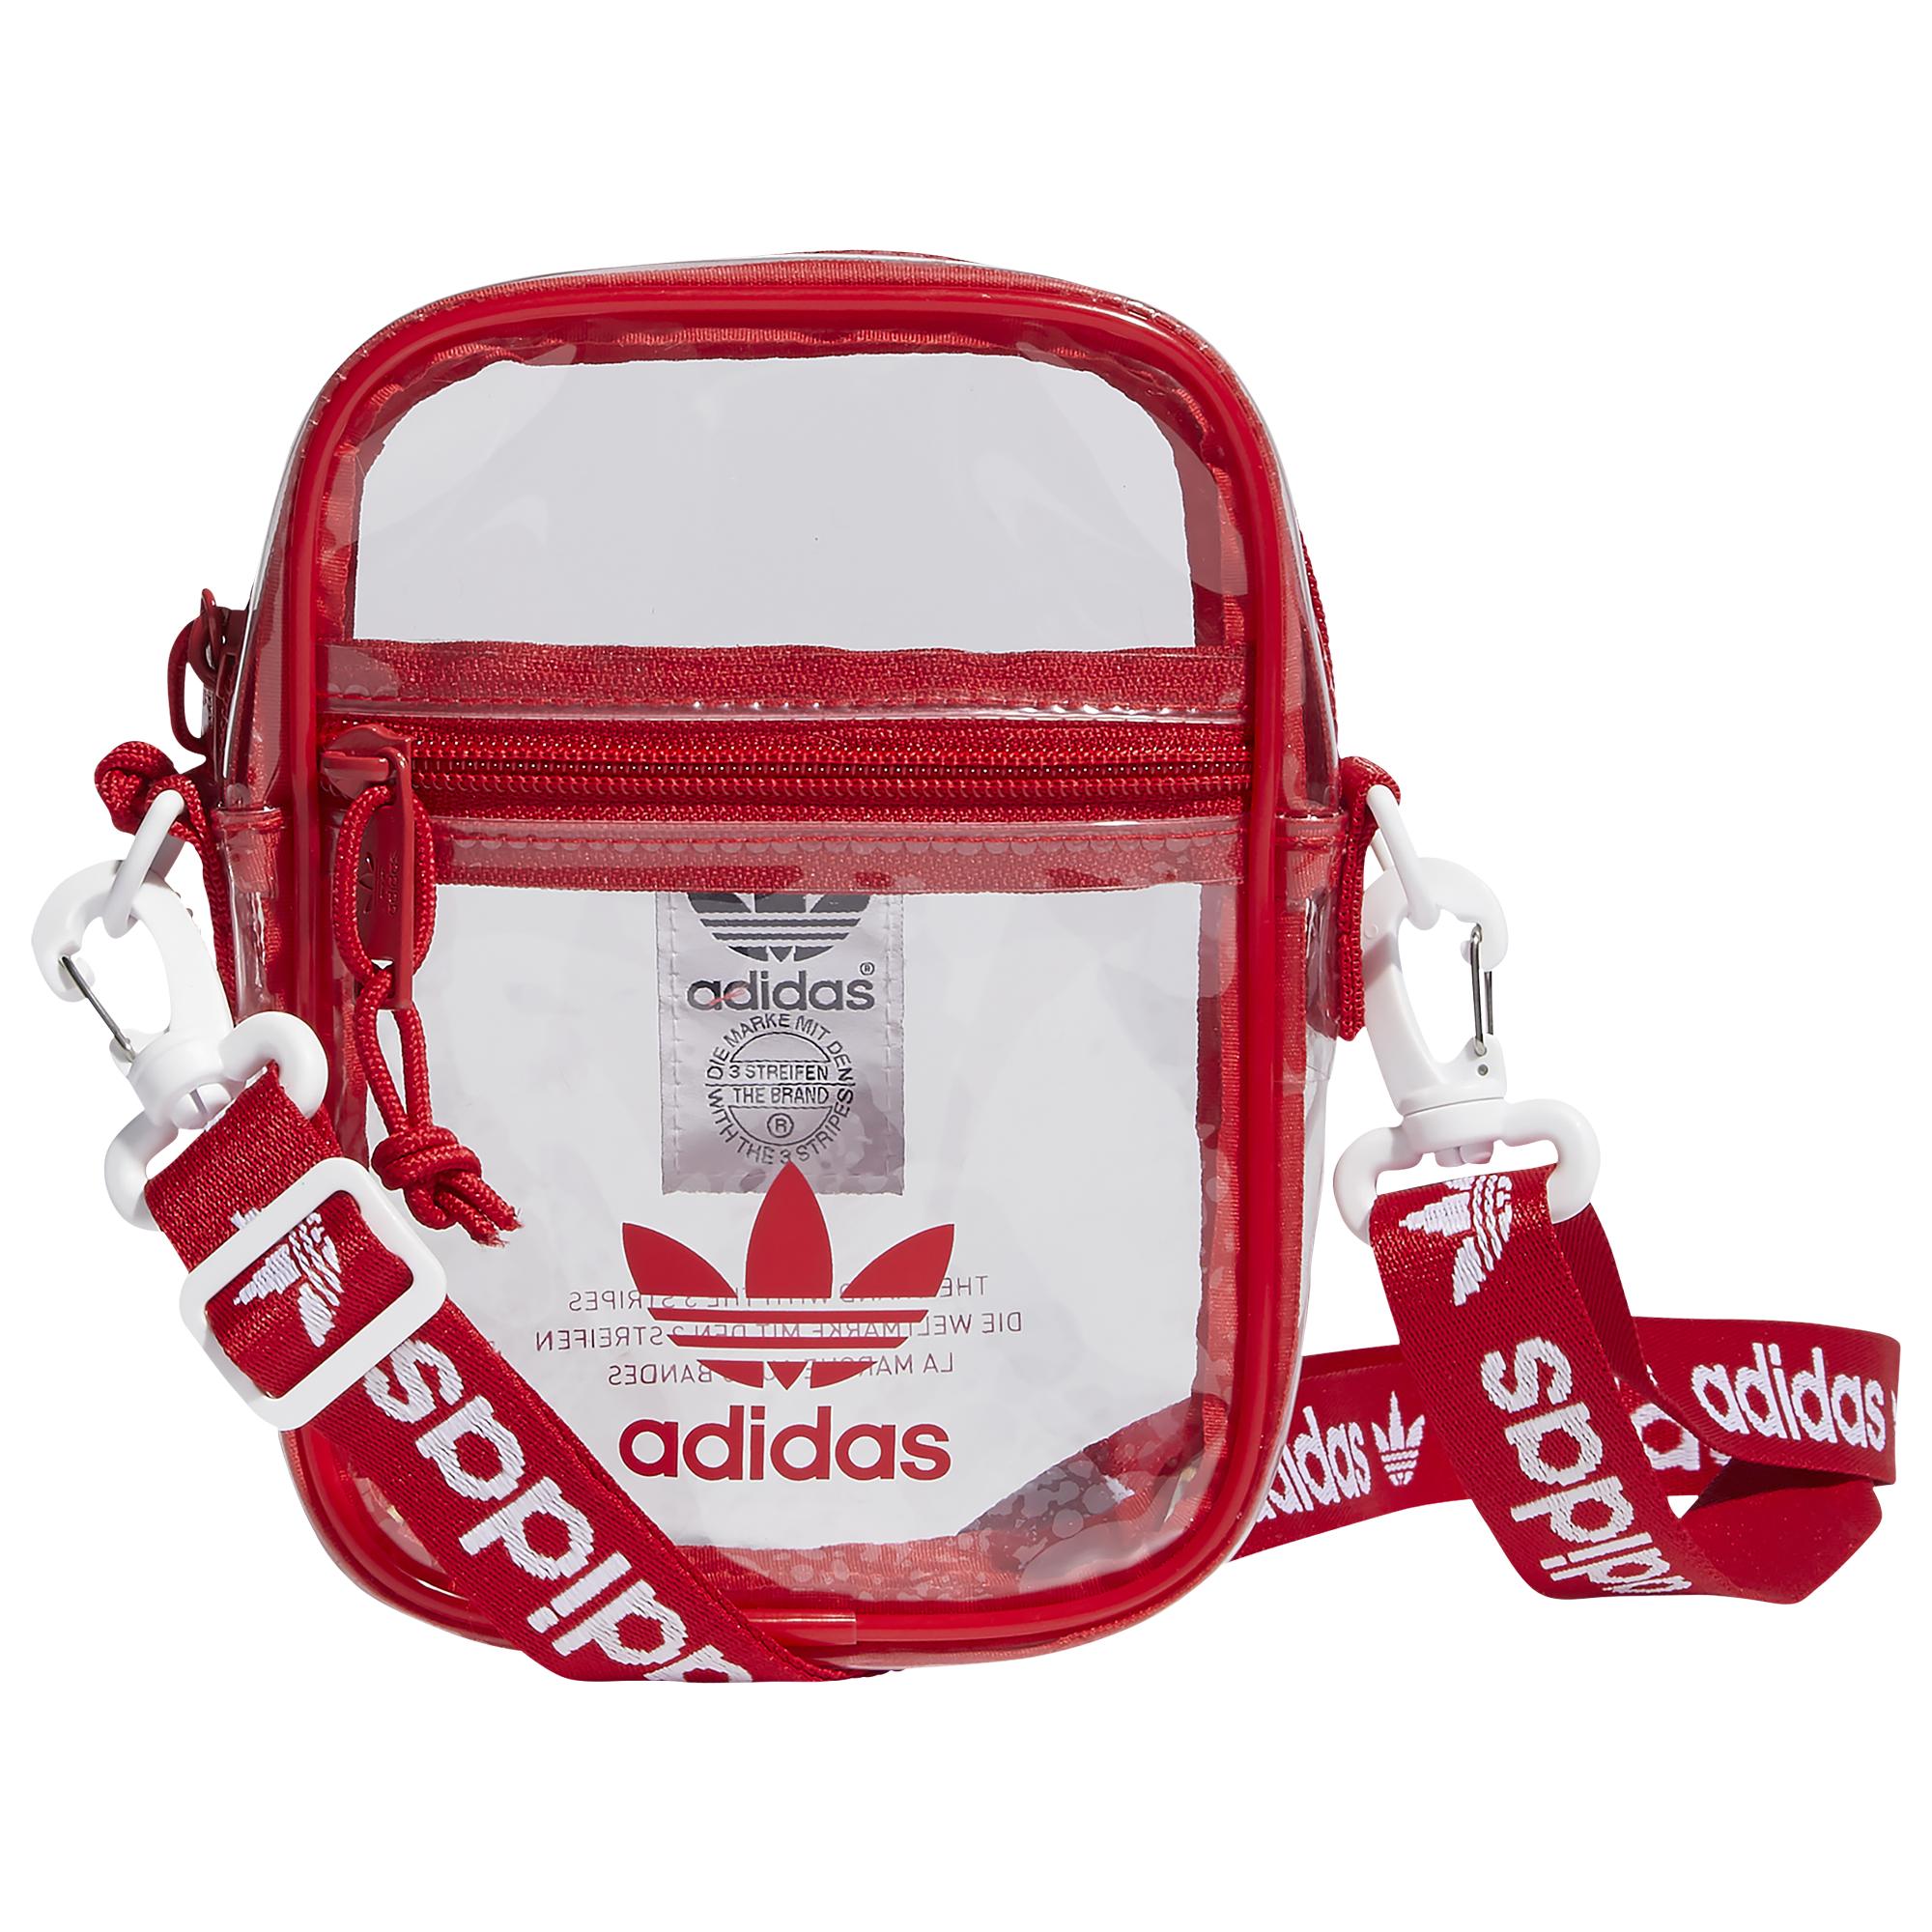 Clear Adidas Crossbody Bag Outlet, SAVE 55% - aveclumiere.com